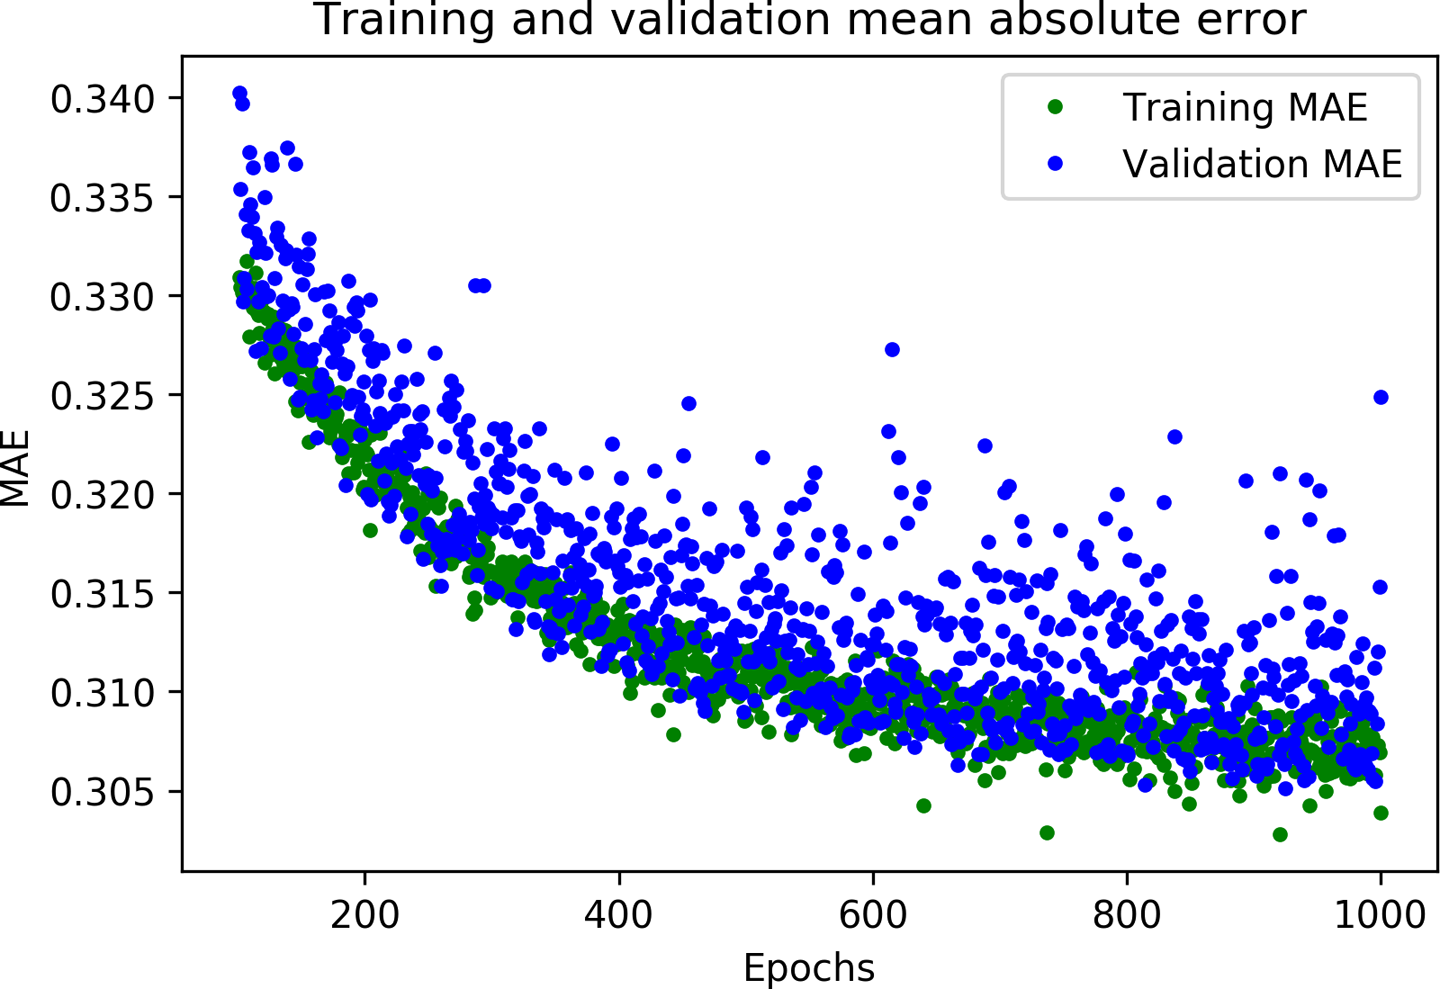 A graph of mean absolute error during training and validation